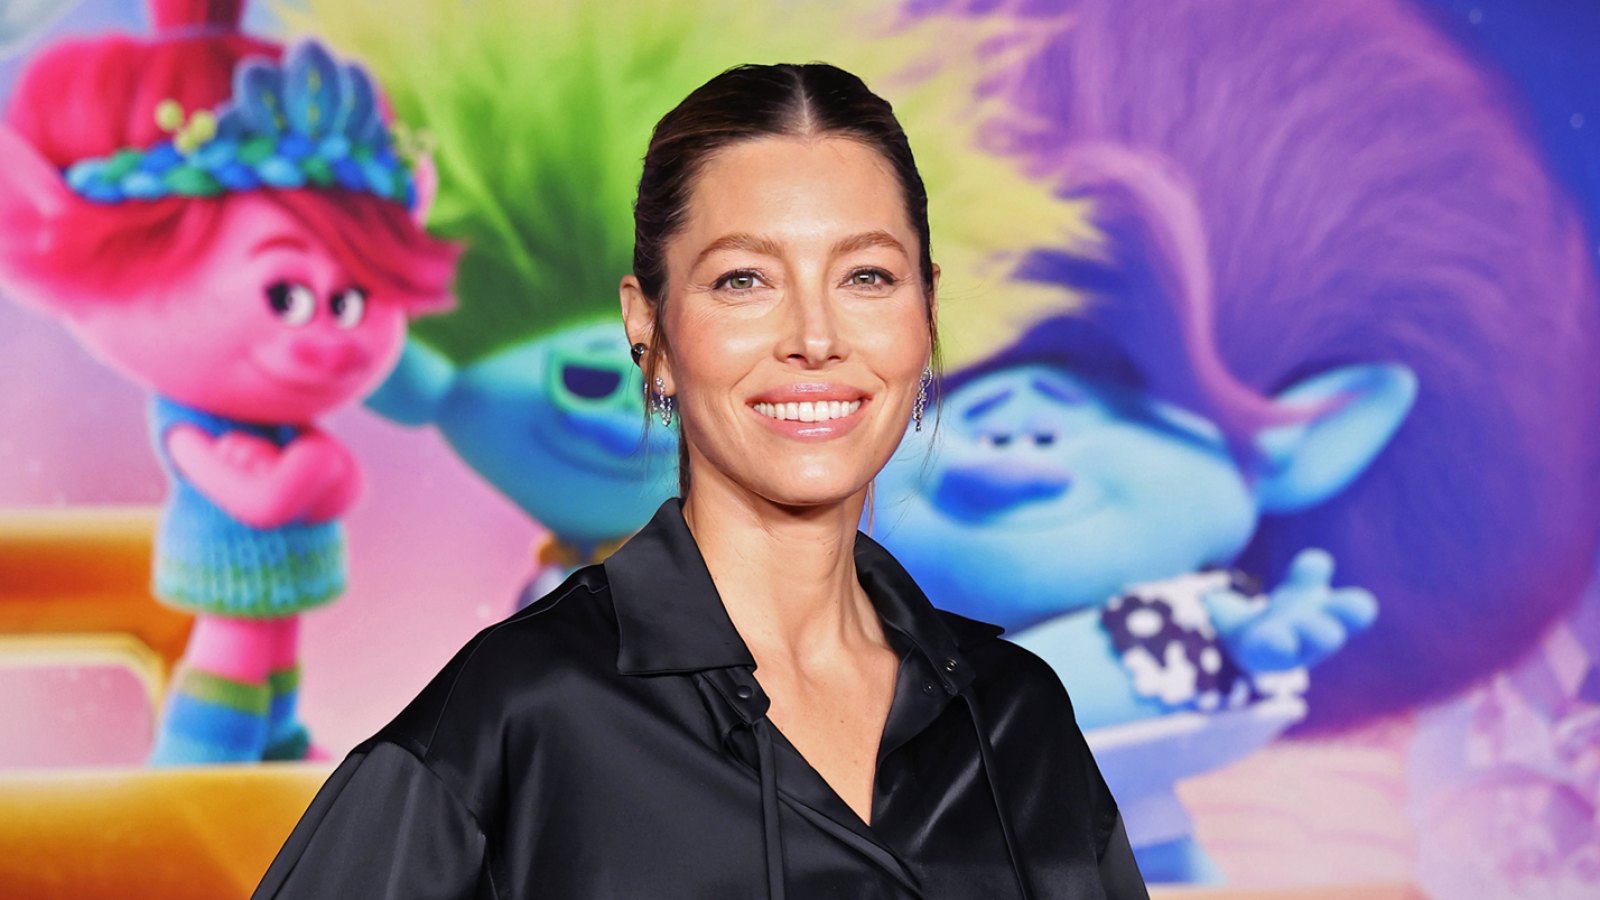 Jessica Biel Breaks Down the Rules for Eating in the Shower Properly